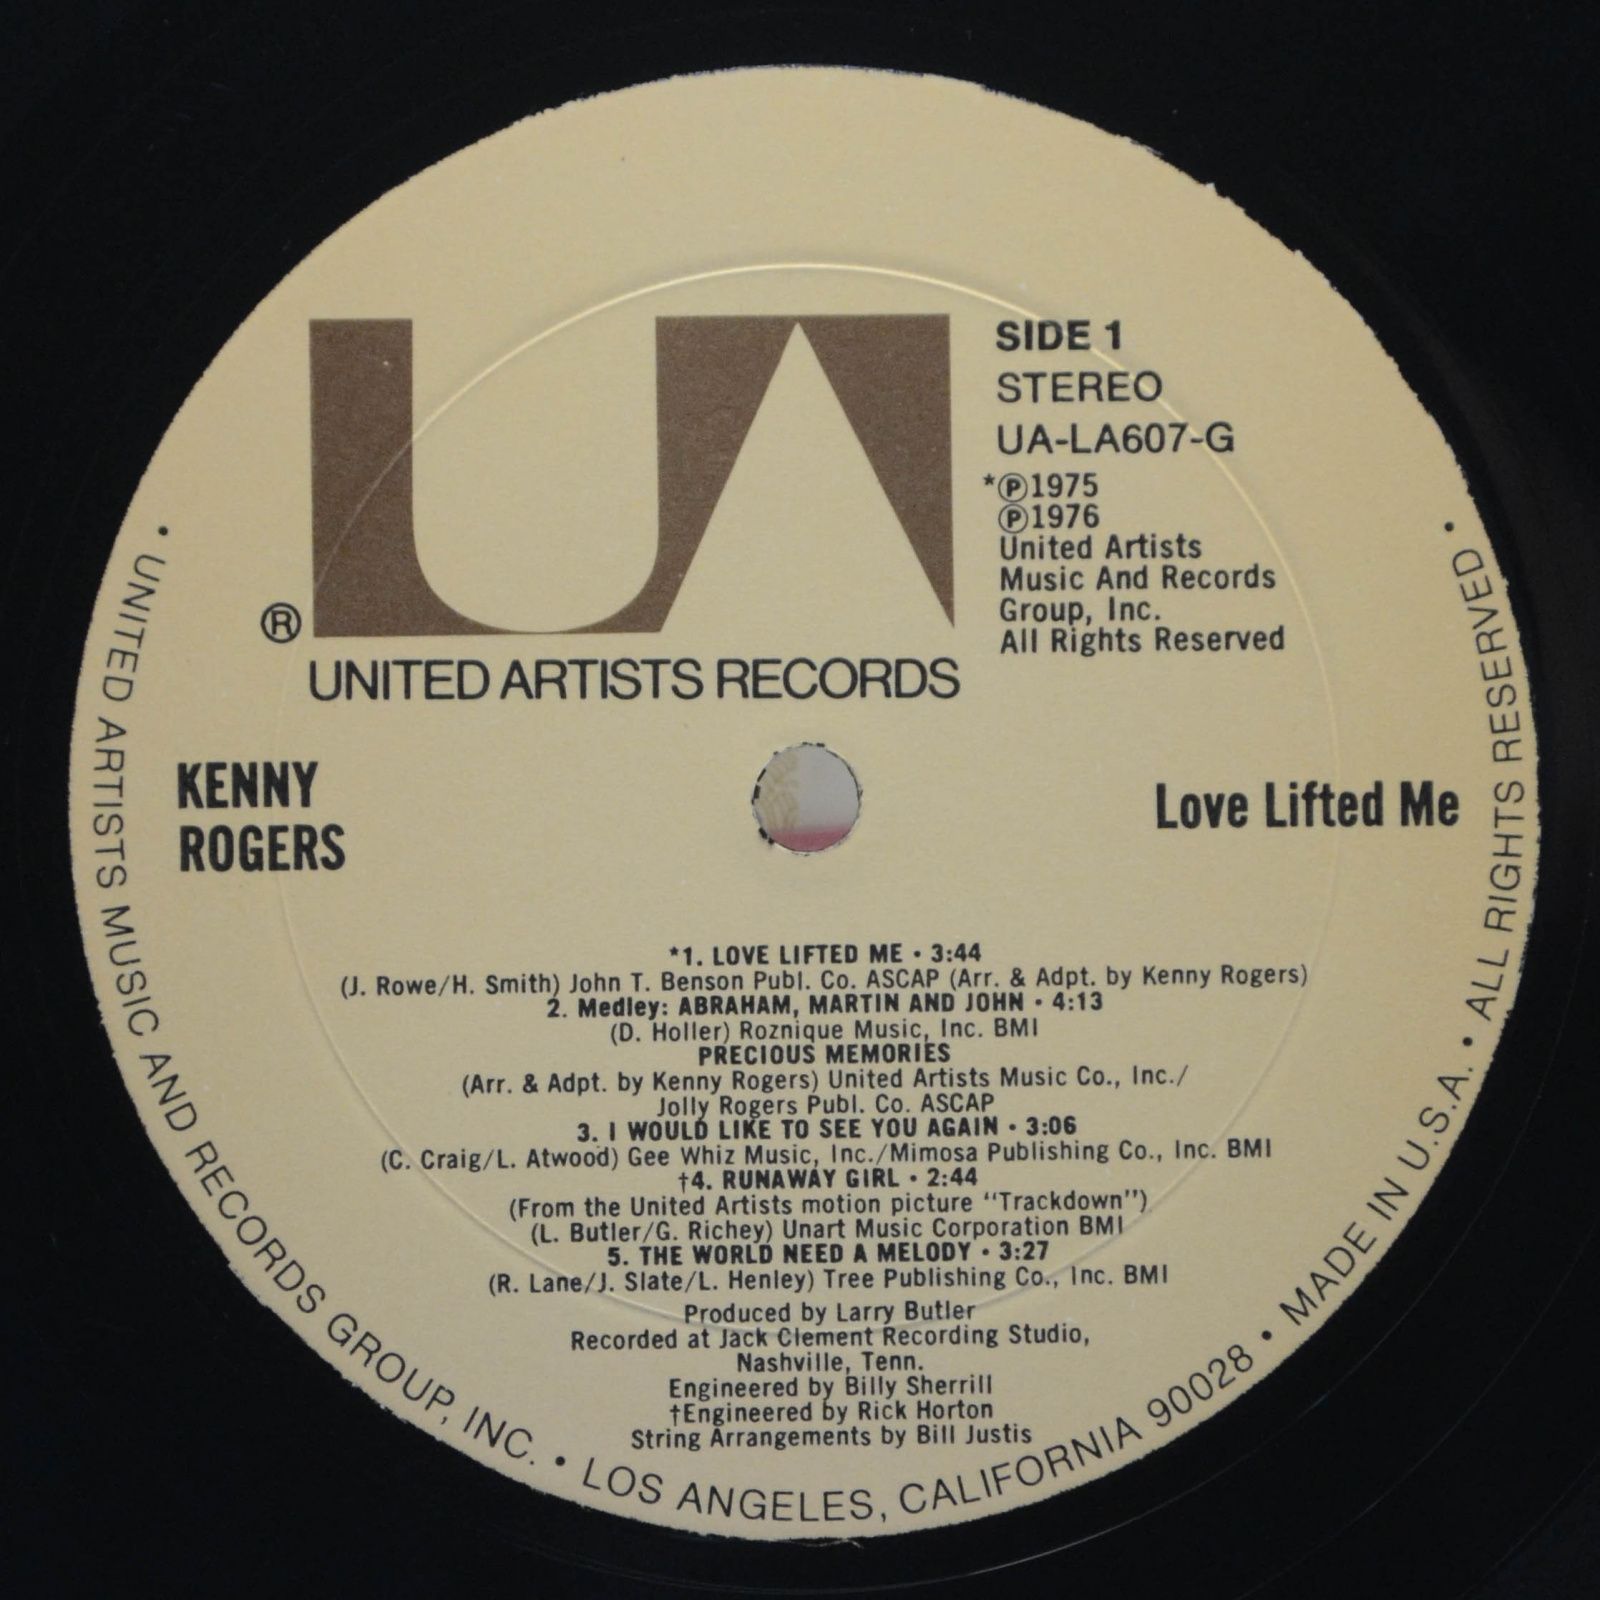 Kenny Rogers — Love Lifted Me, 1976